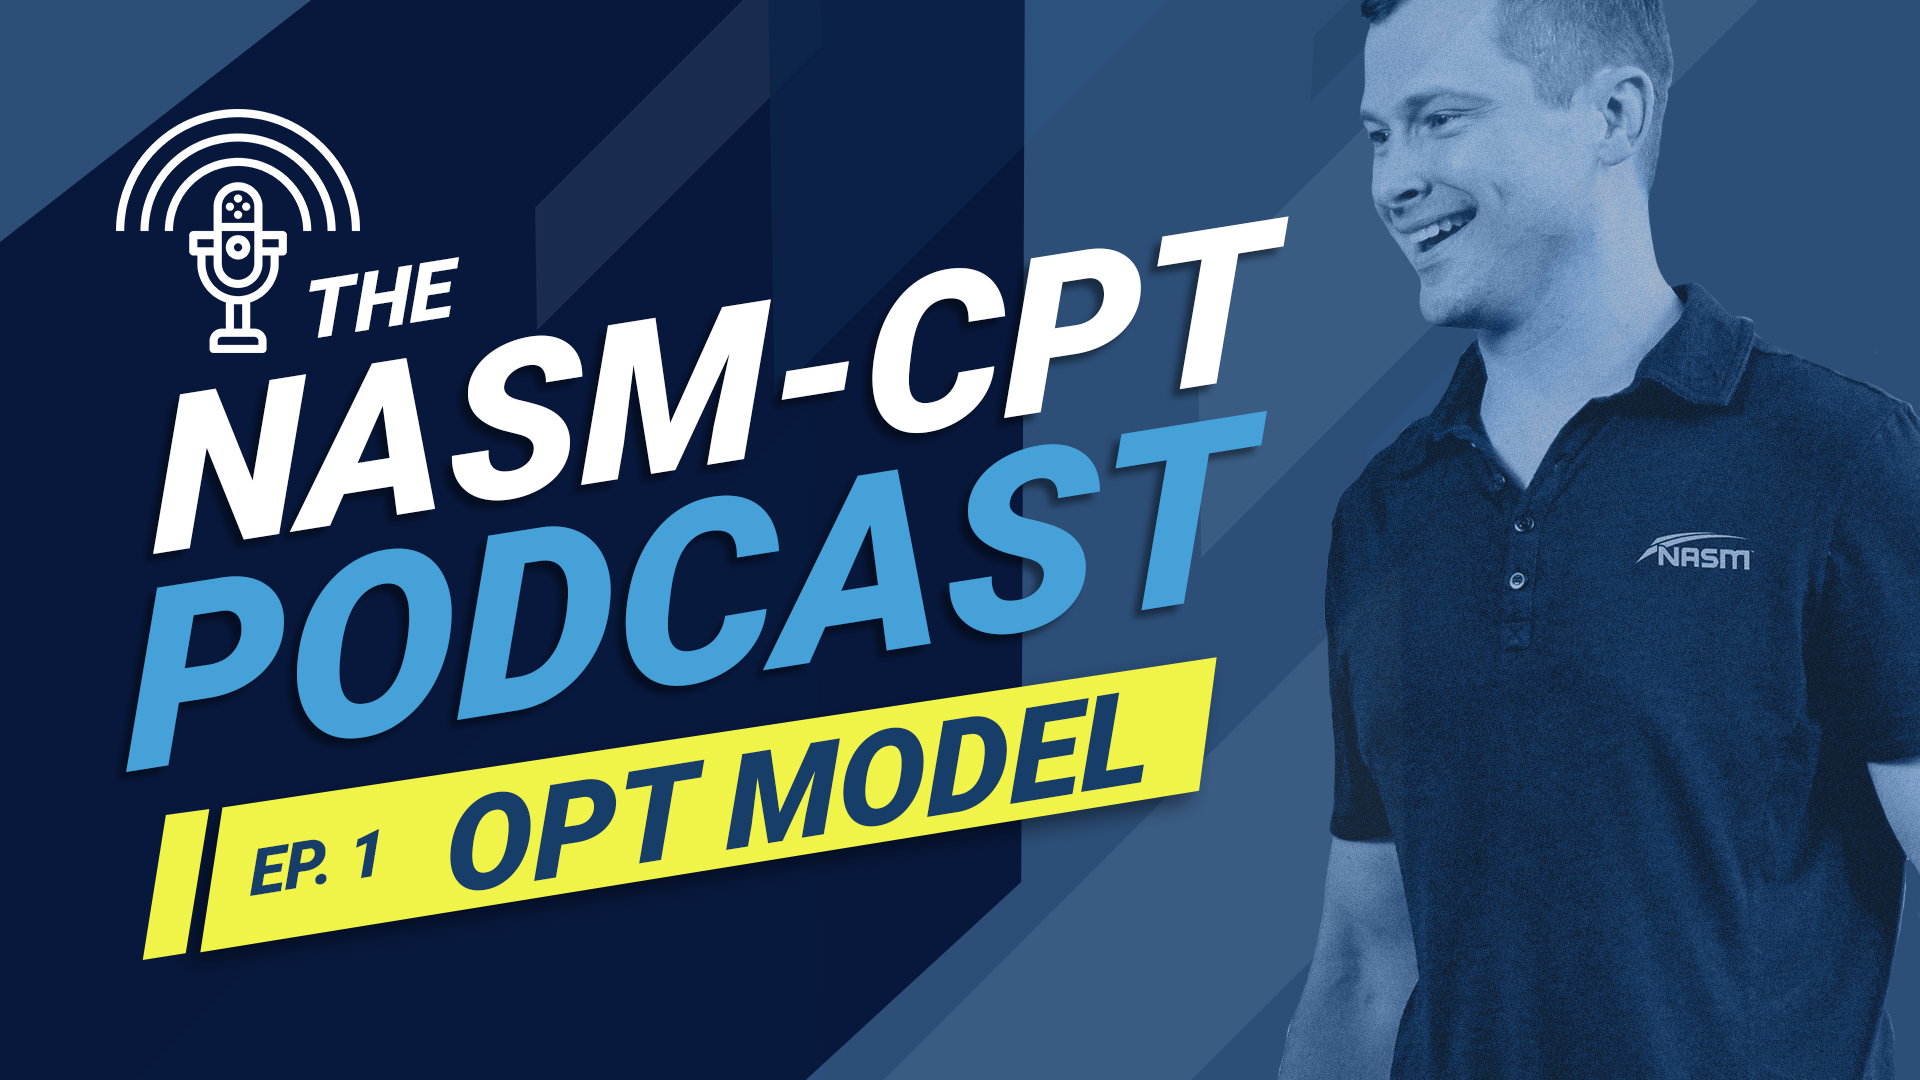 The NASM-CPT Podcast Ep. 1 OPT Model